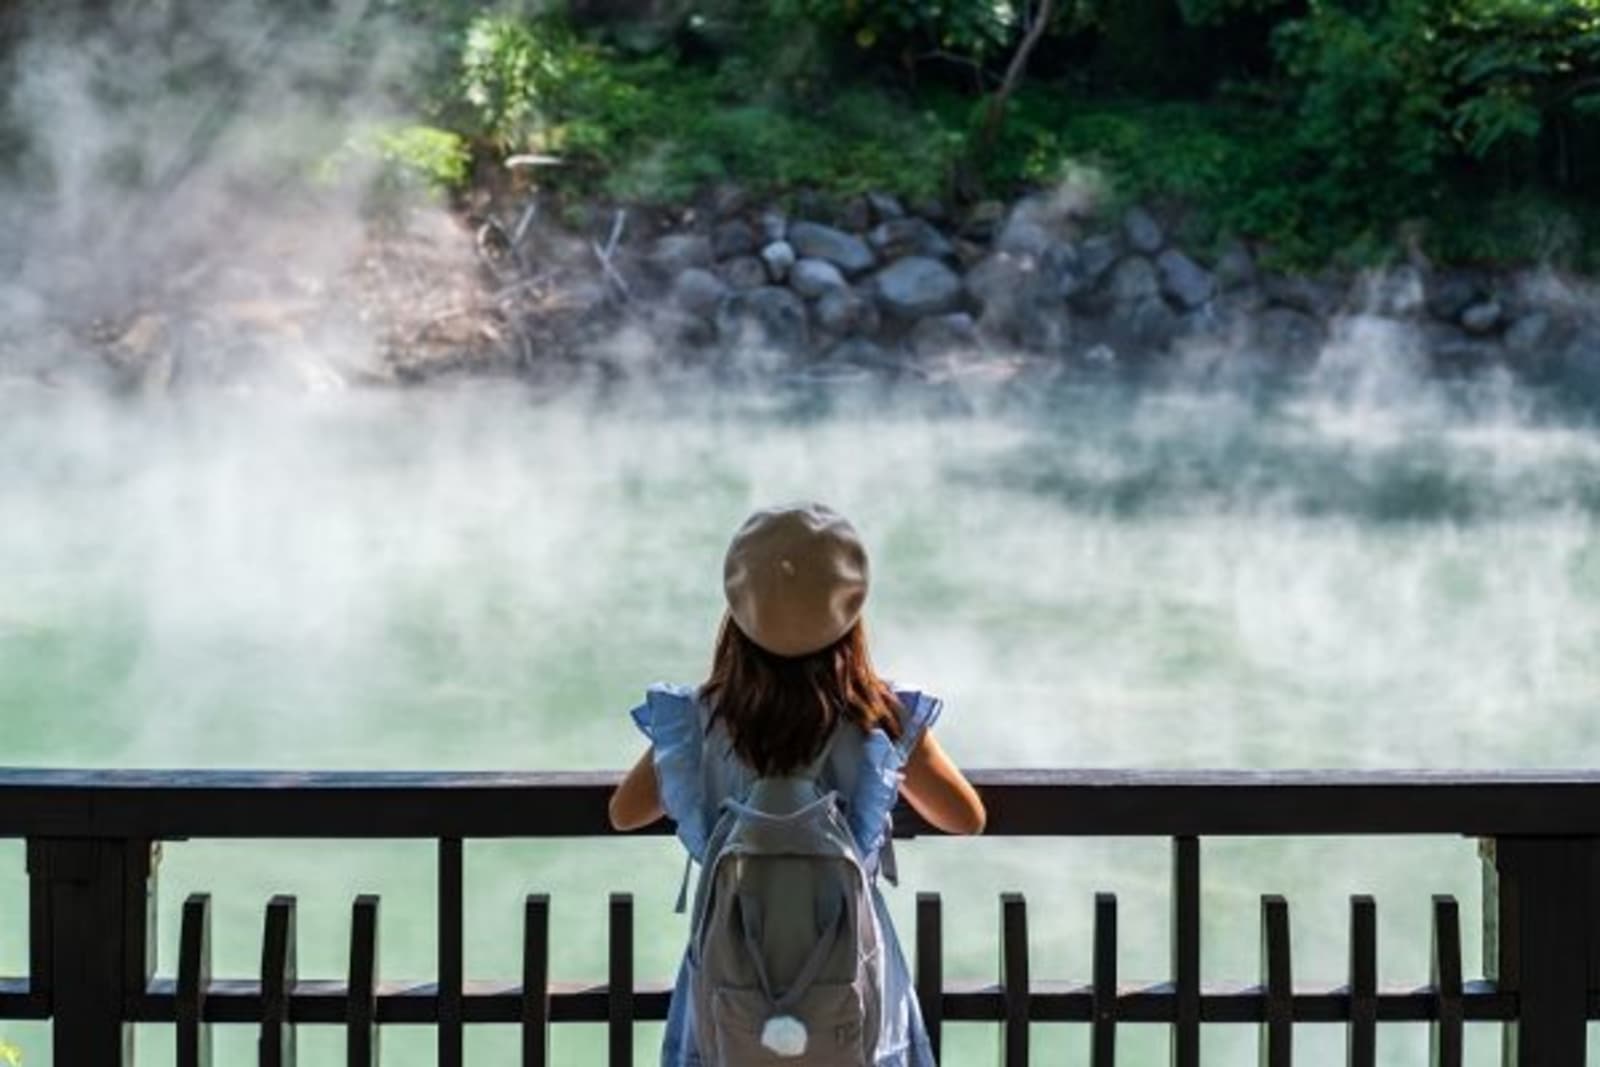 Female looking at steam coming from water (hot springs)